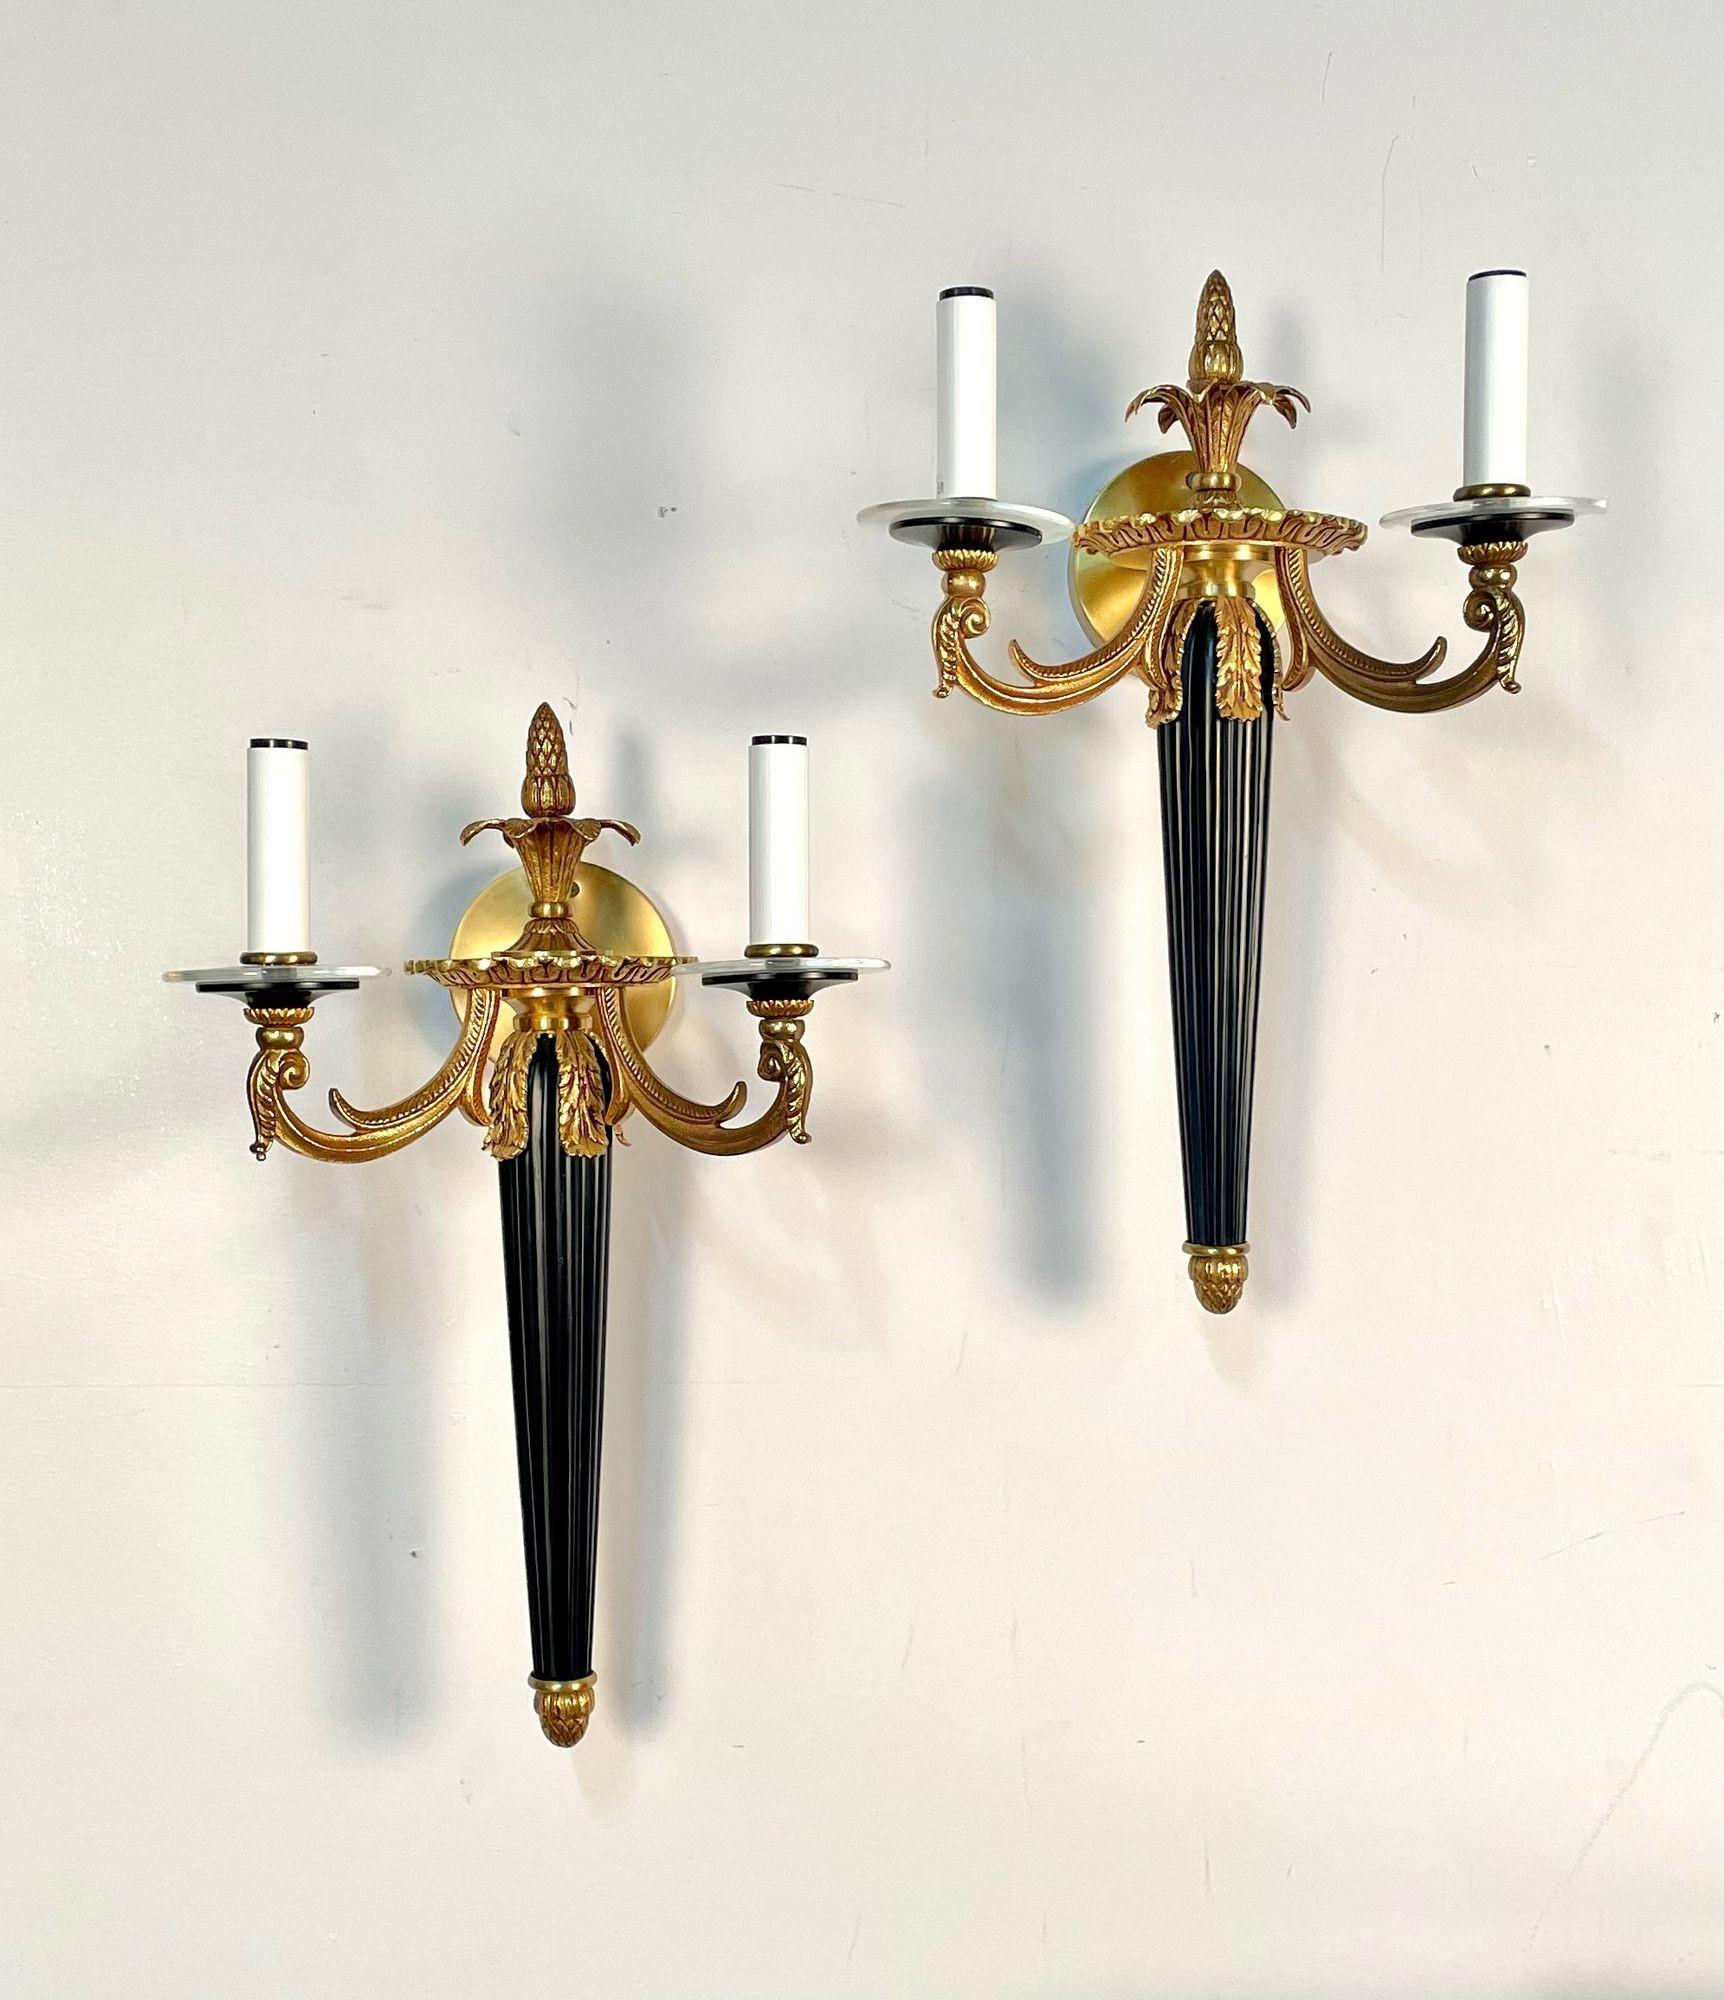 Pair of Louis XVI Style French Sconces, Ebony and Bronze, Two Light, Electrified in the Manner of Maison Bagues

A strickingly well crafted pair of stylish wall sconces each having bronze adornments with a reeded ebony column center. The pair having